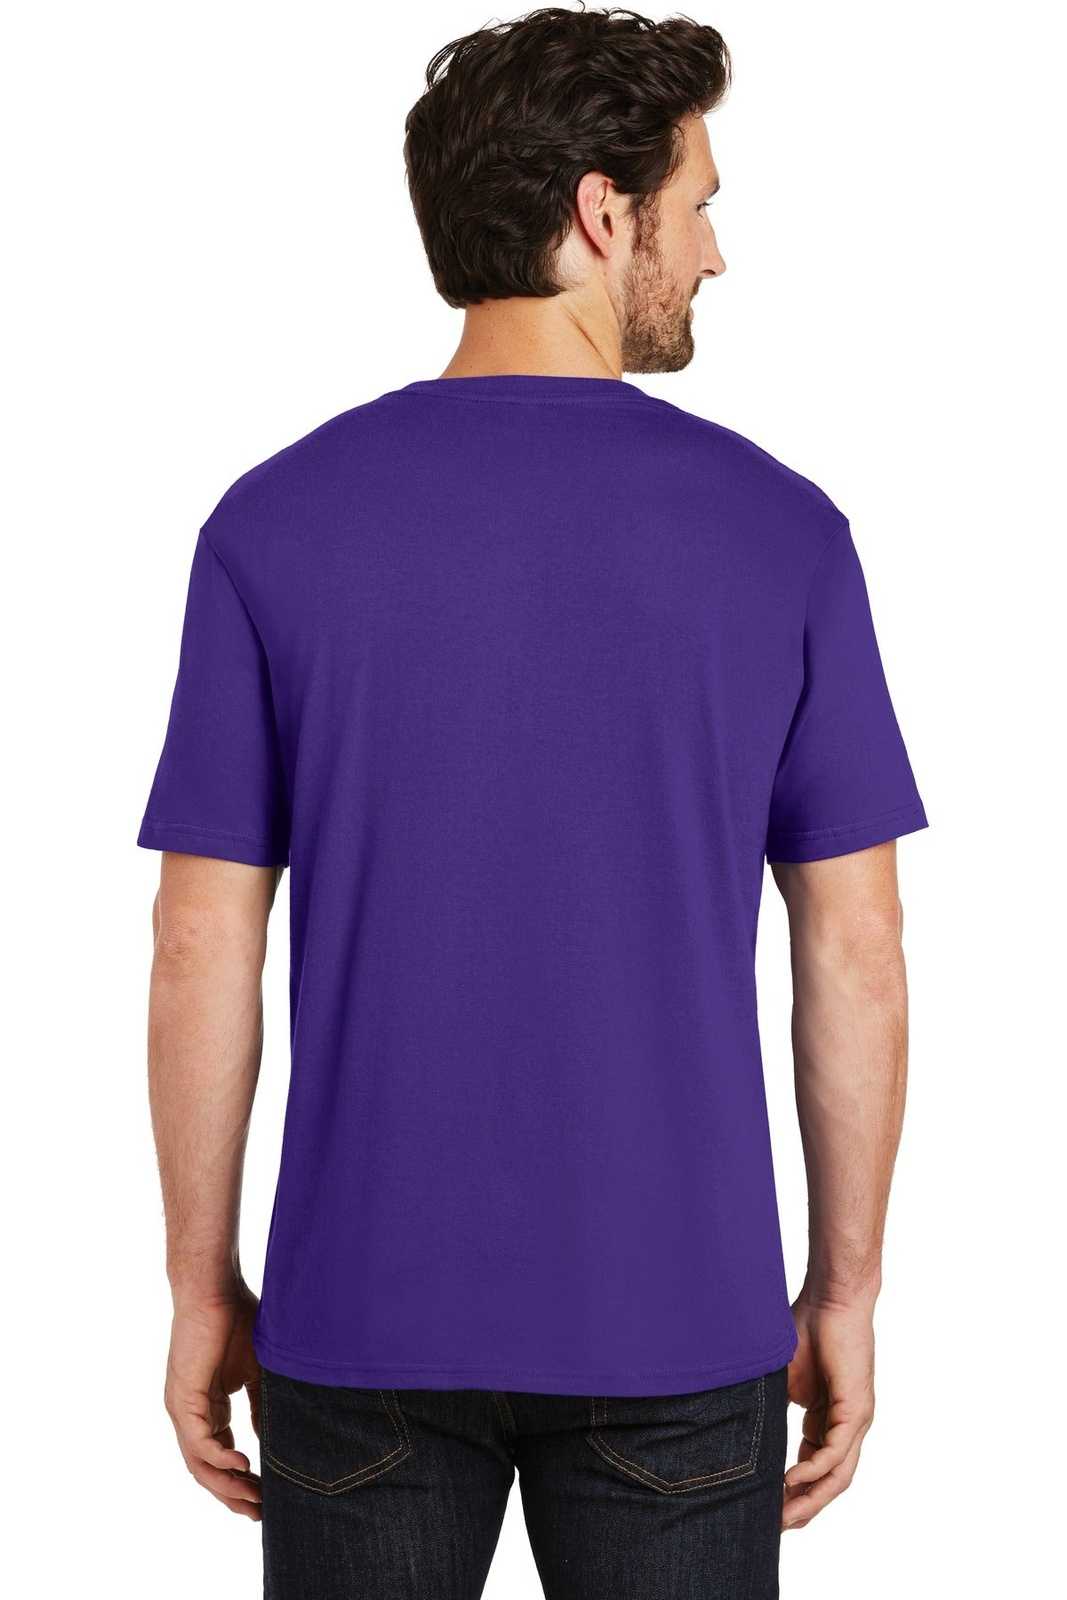 District DT104 Perfect Weight Tee - Purple - HIT a Double - 1